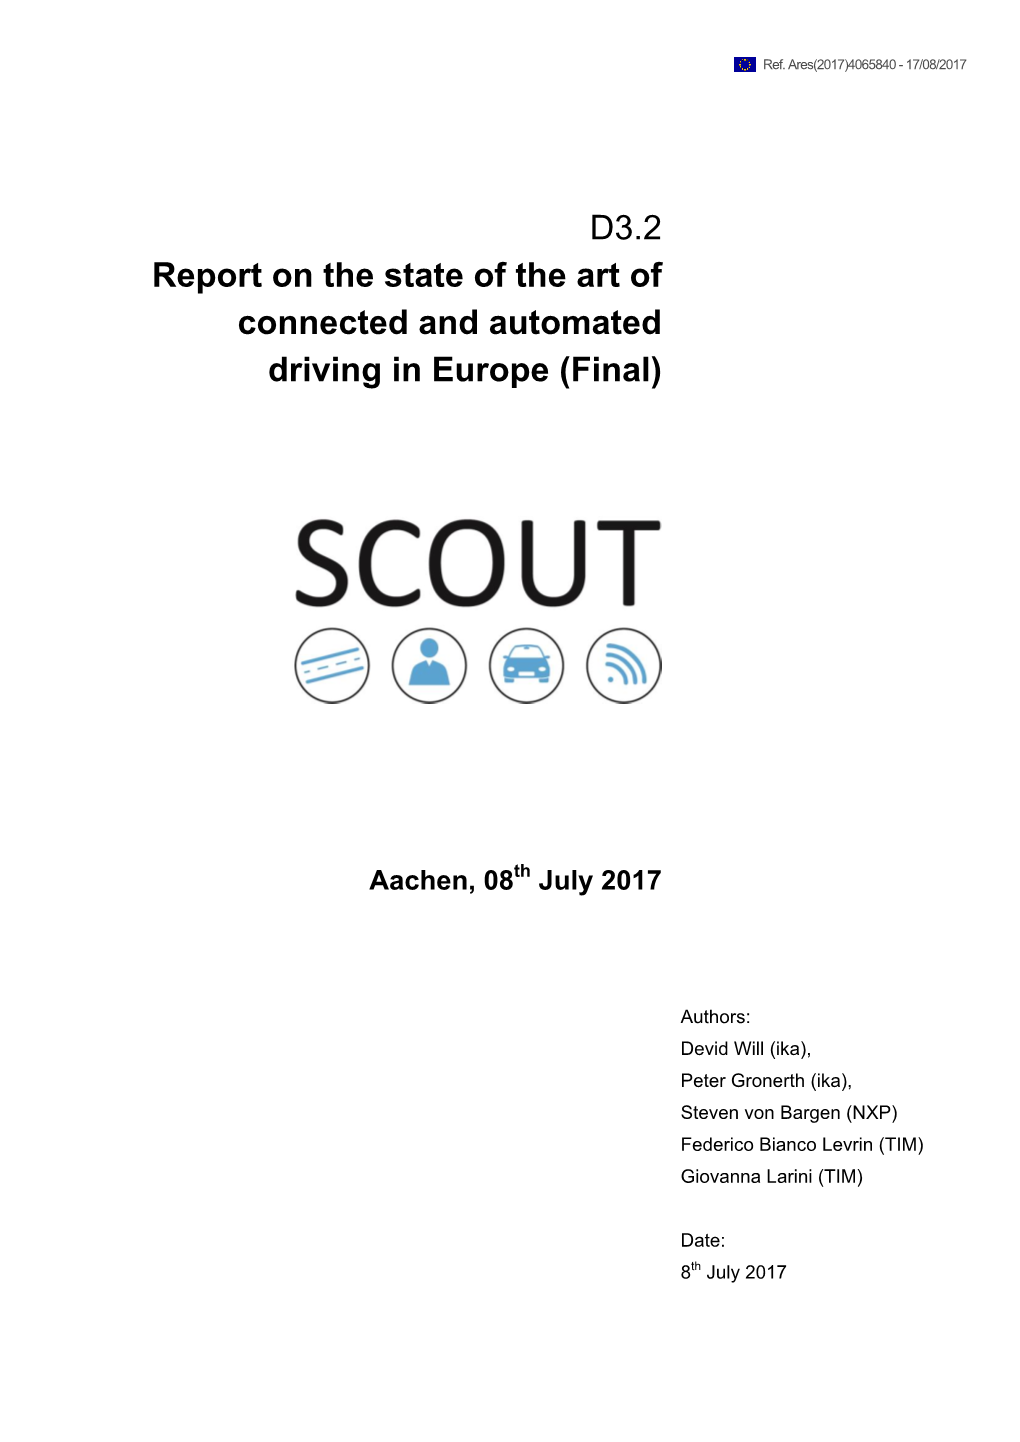 D3.2 Report on the State of the Art of Connected and Automated Driving In